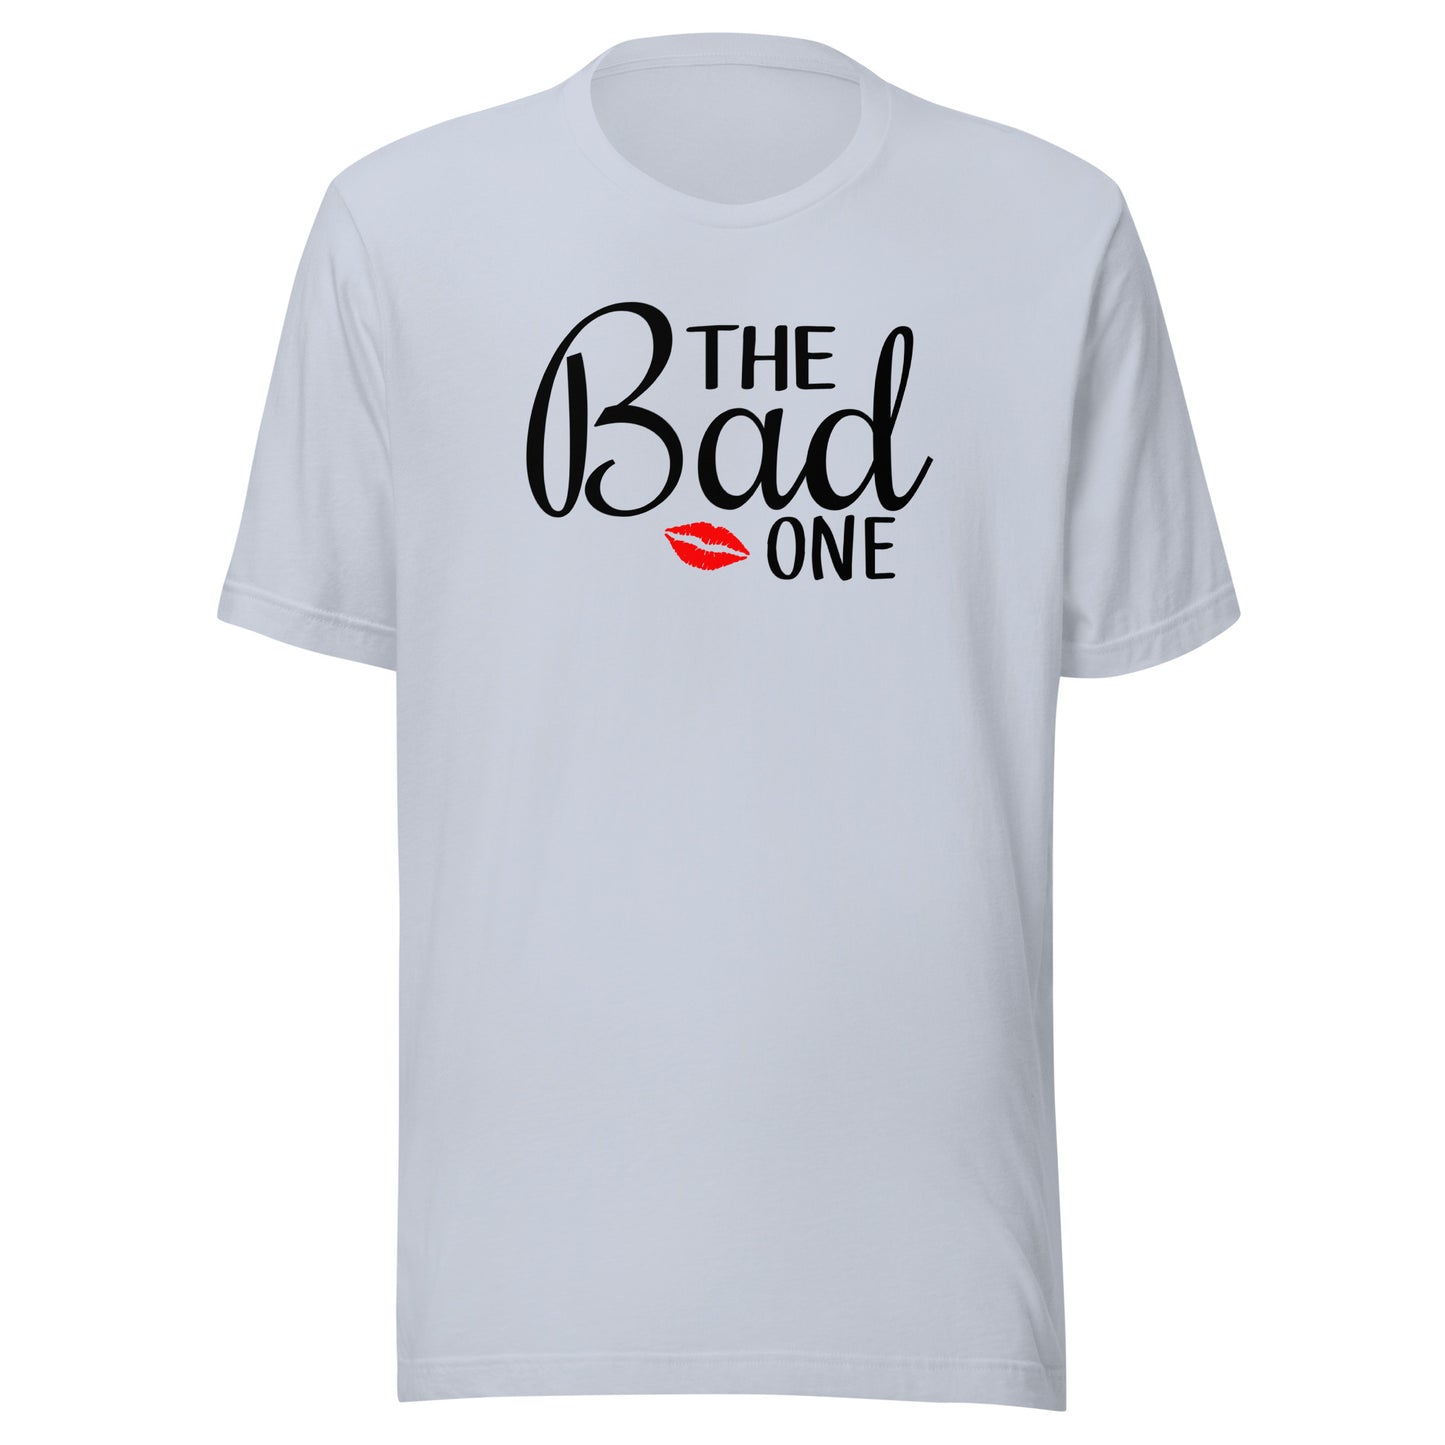 Small -  Medium The Bad One (black letters)